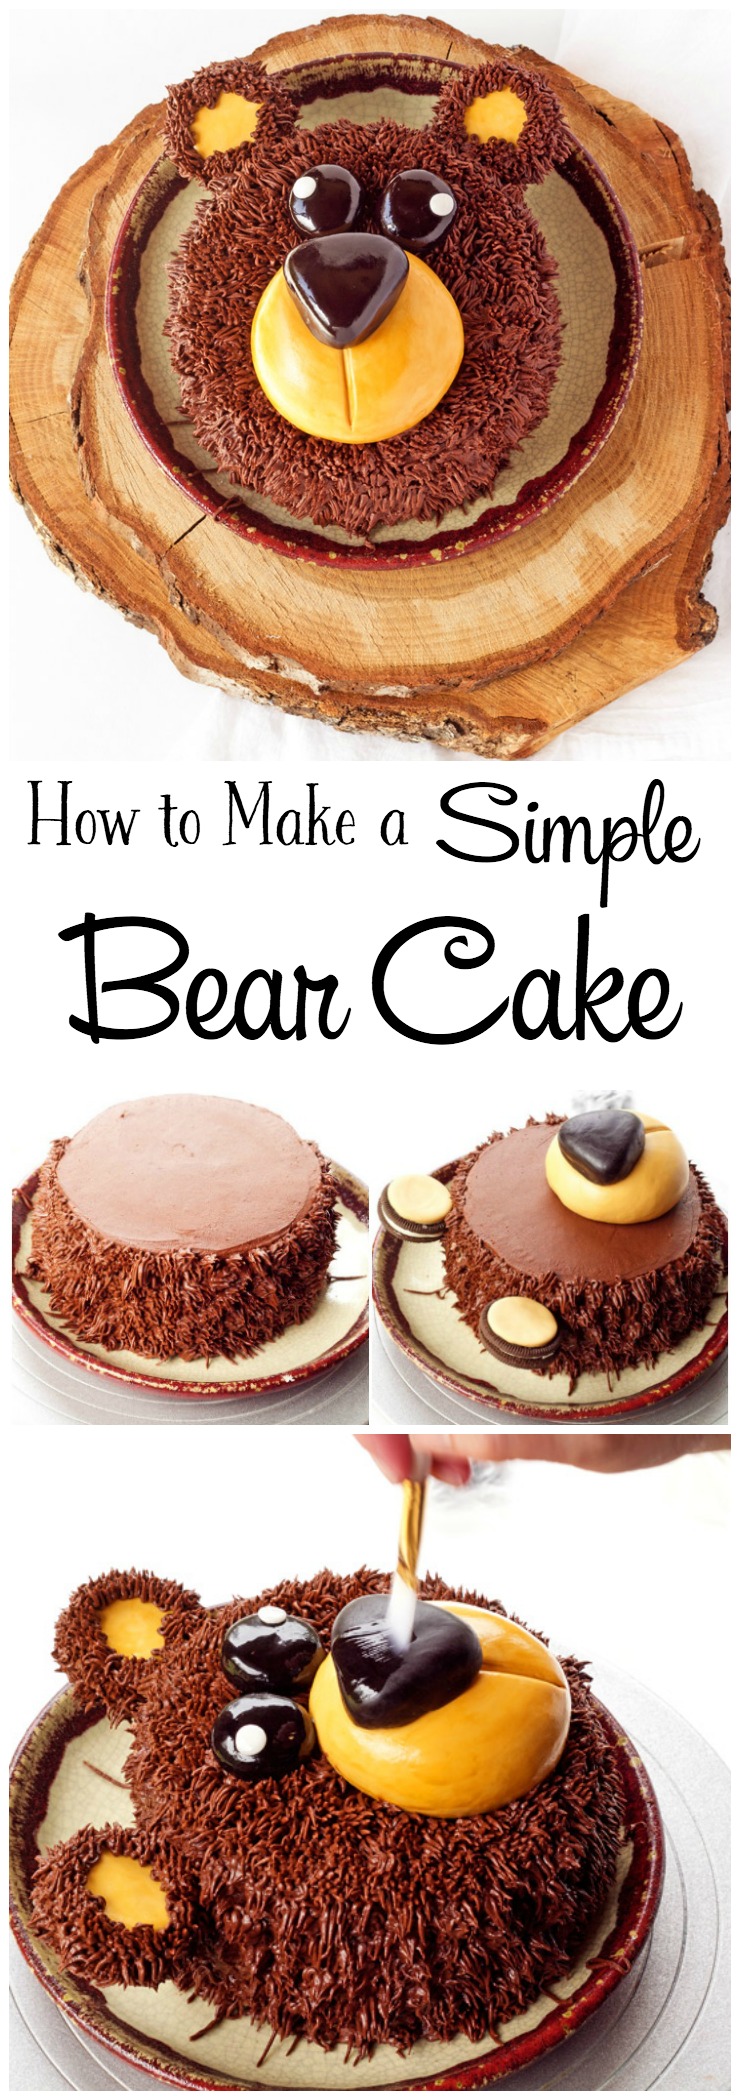 How to Make a Simple Bear Cake with Video - The Bearfoot Baker